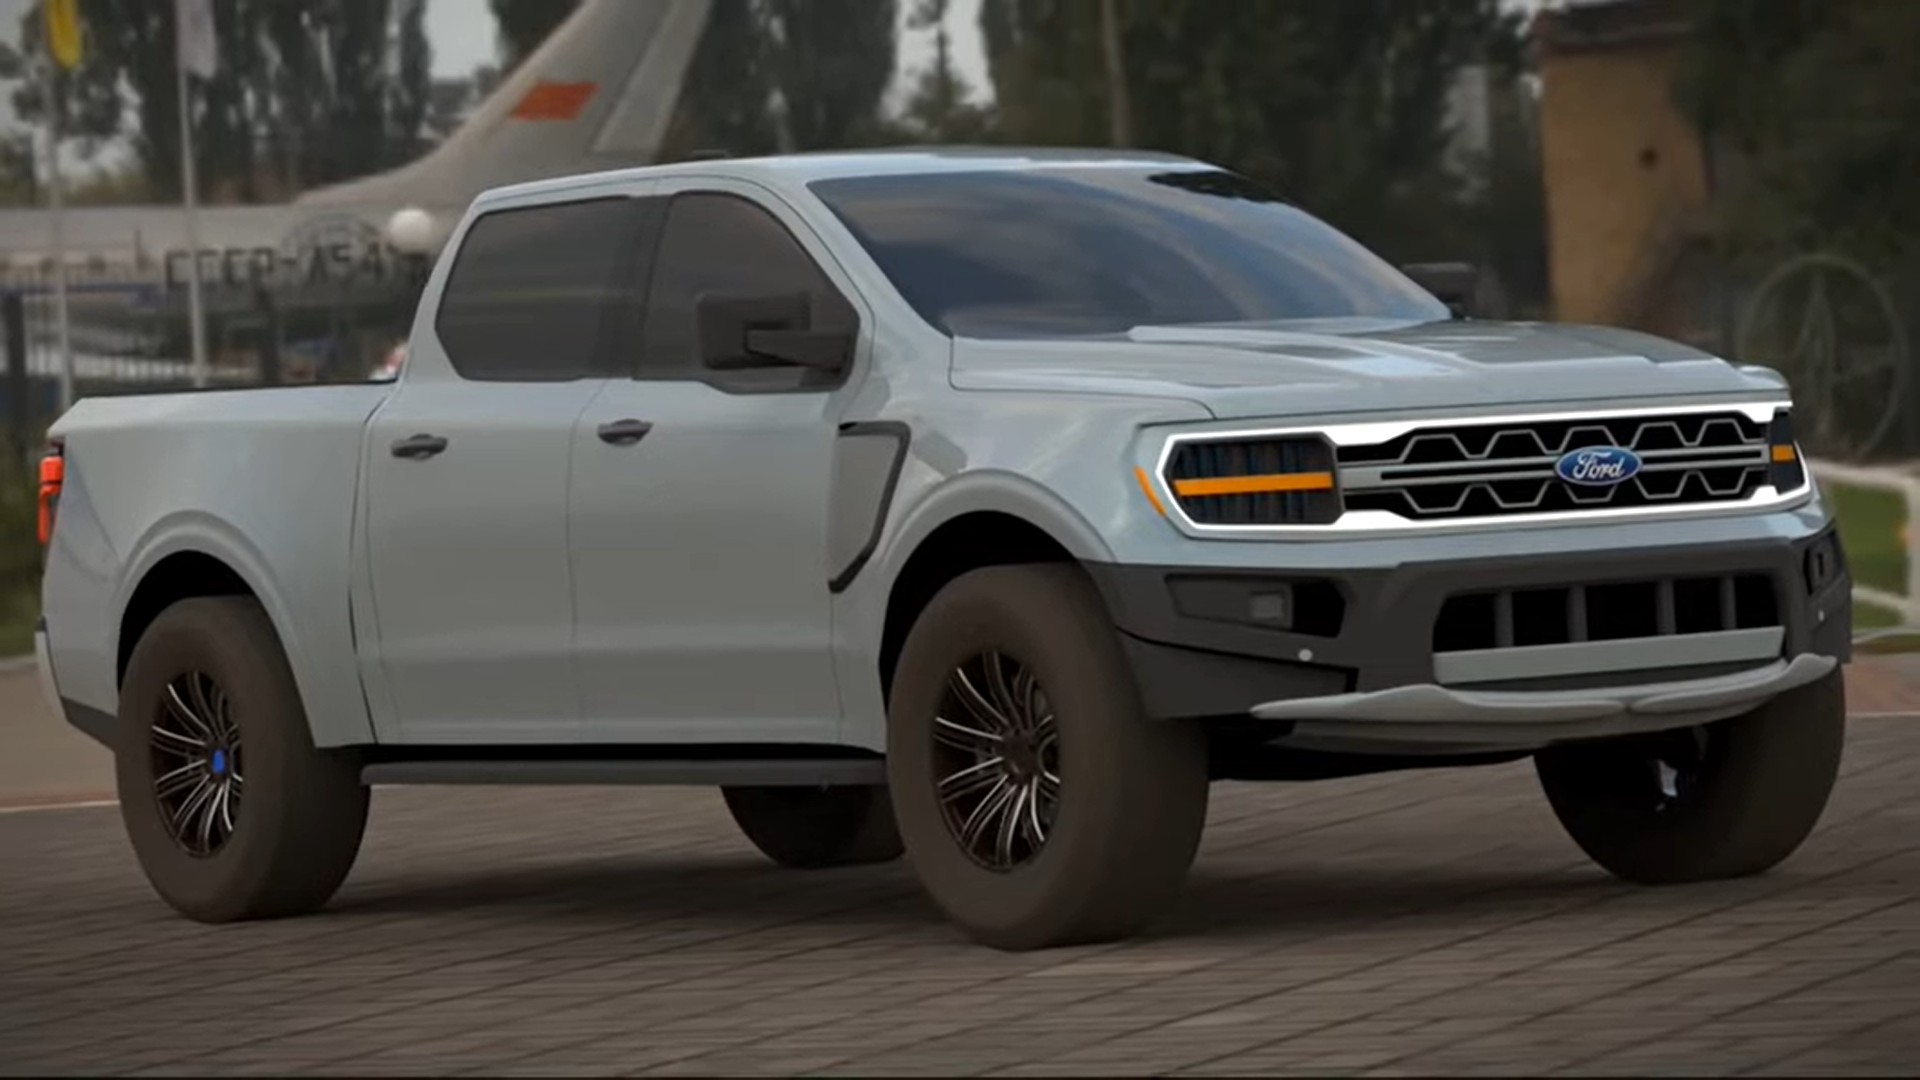 2025 Ford 4x4 Pickup Truck Alternative Design Proposes Unified Styling